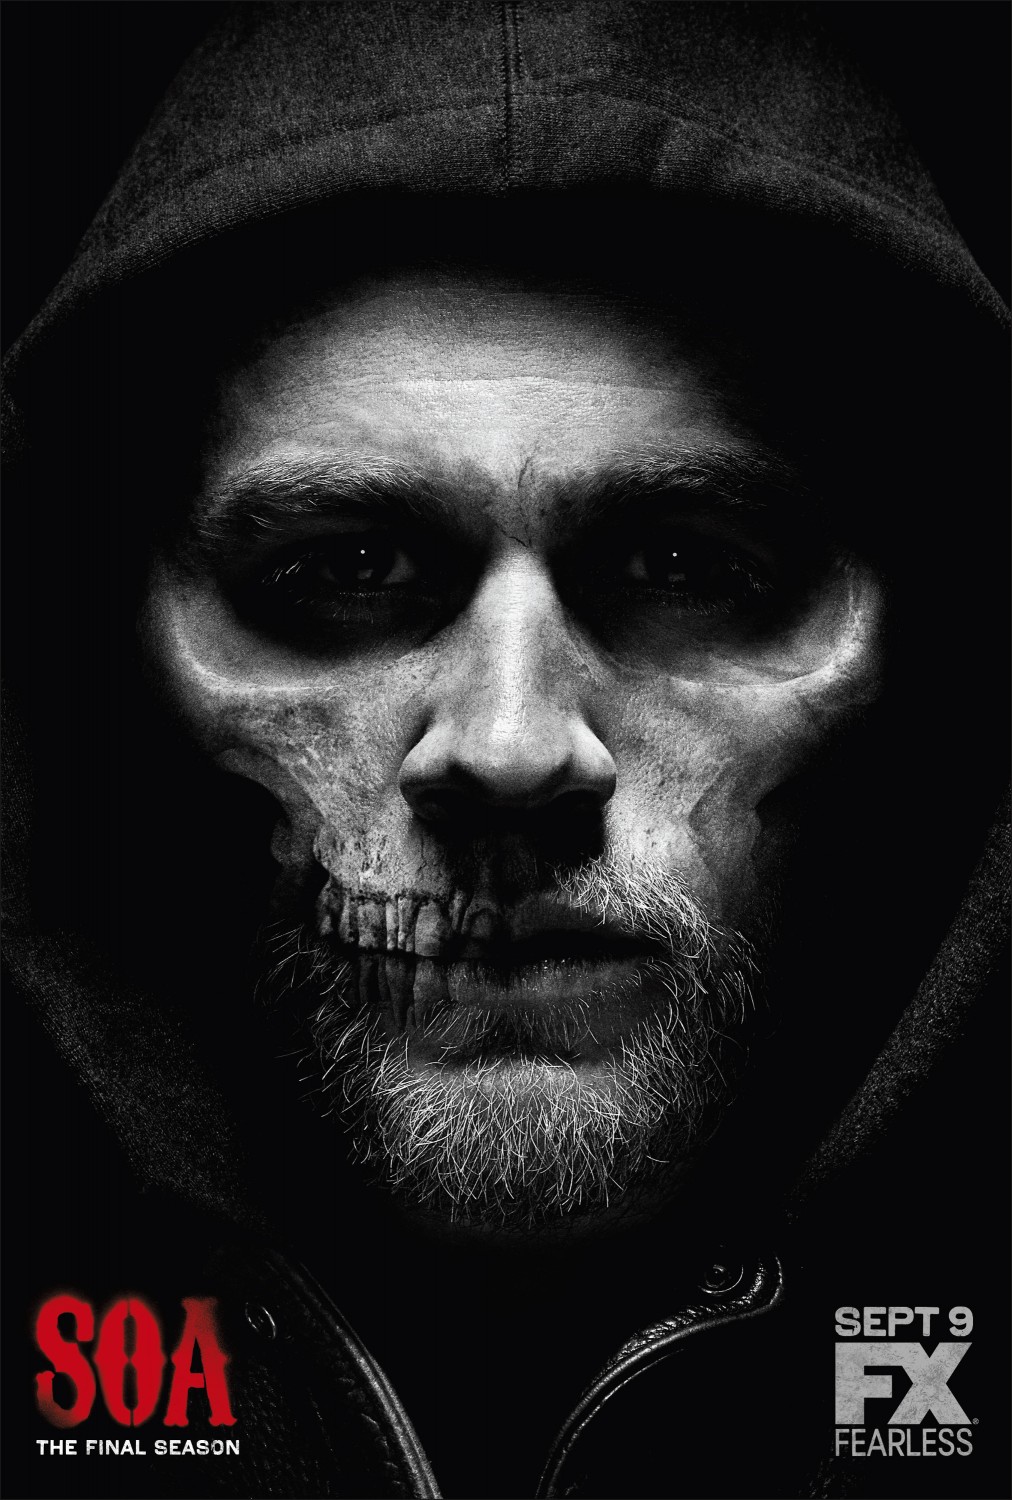 Extra Large TV Poster Image for Sons of Anarchy (#22 of 24)